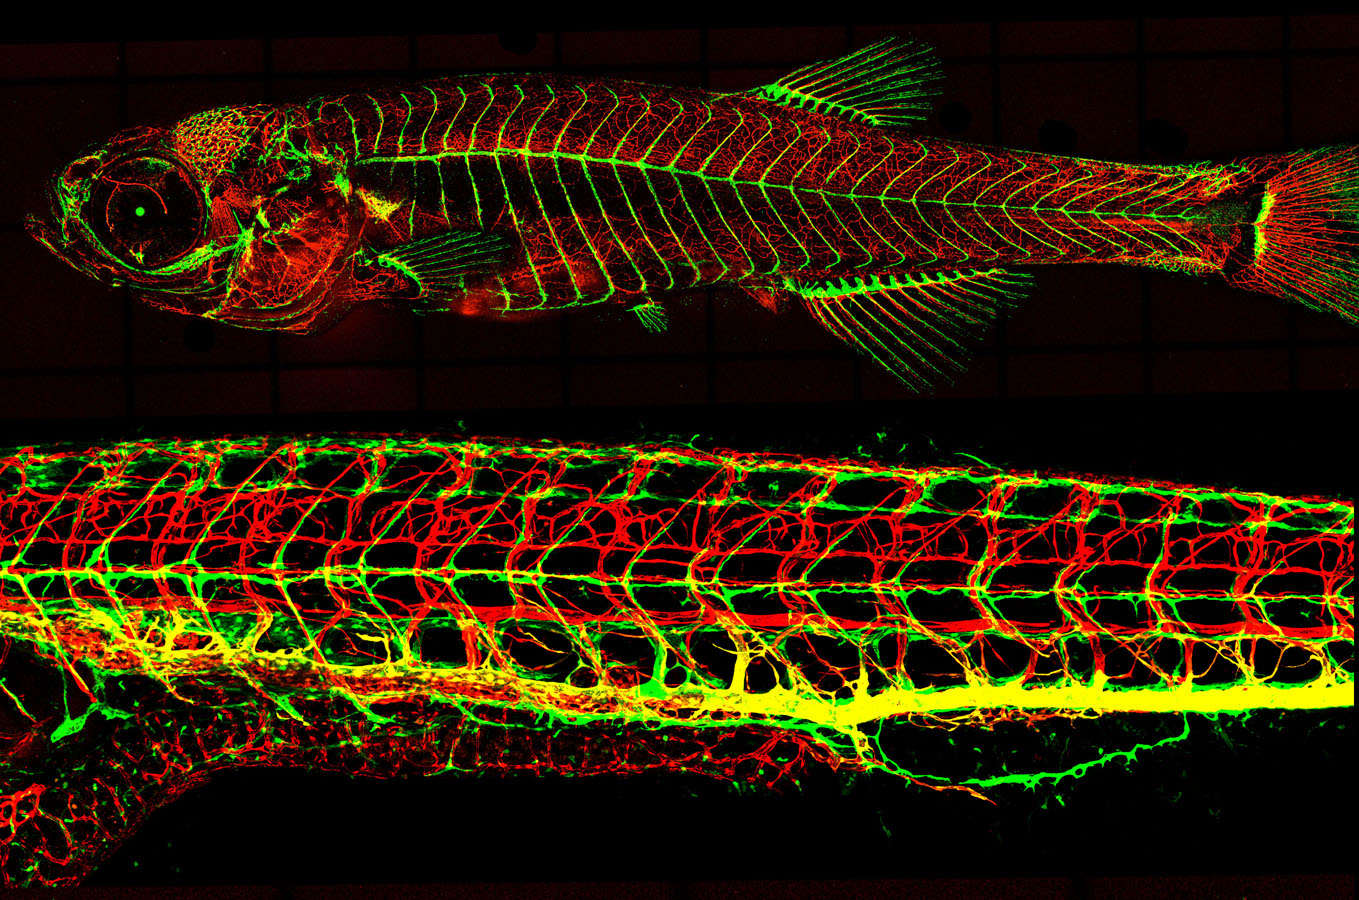 Lateral views of Tg(kdrl:cherry); Tg(mrc1a:egfp) double-transgenic animals, including a 19 day old whole fish (top) and a 12 day old close-up of the trunk (bottom).